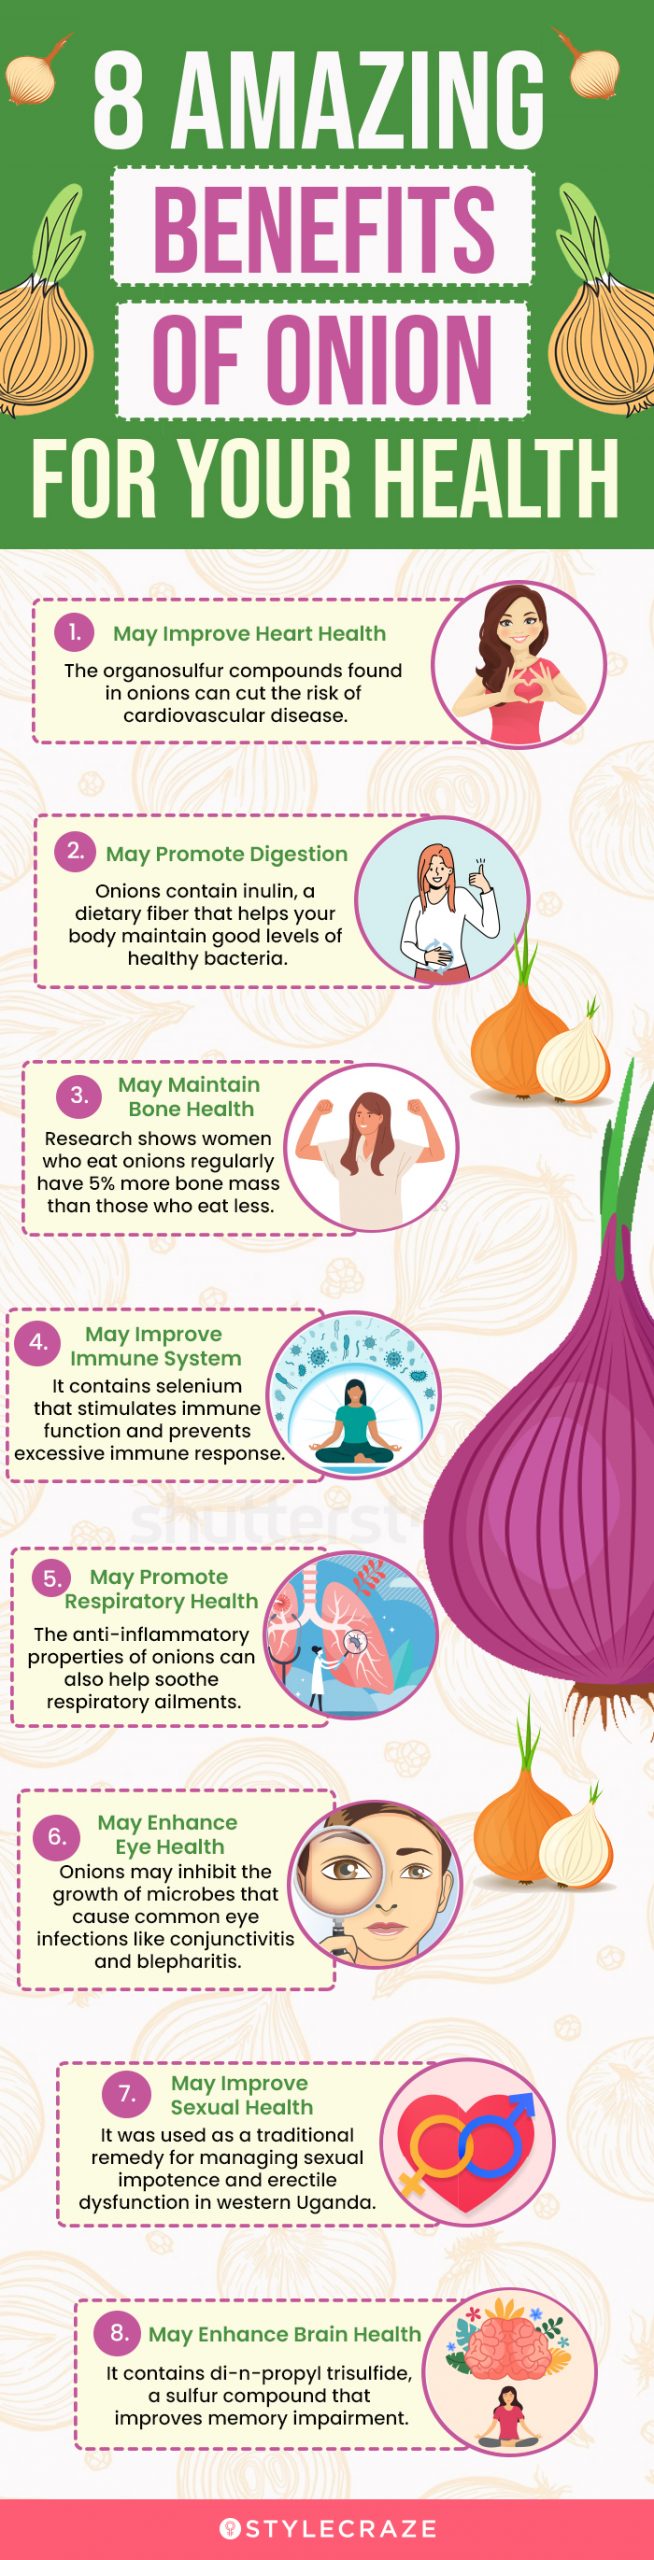 8 amazing benefits of onion for your health [infographic]